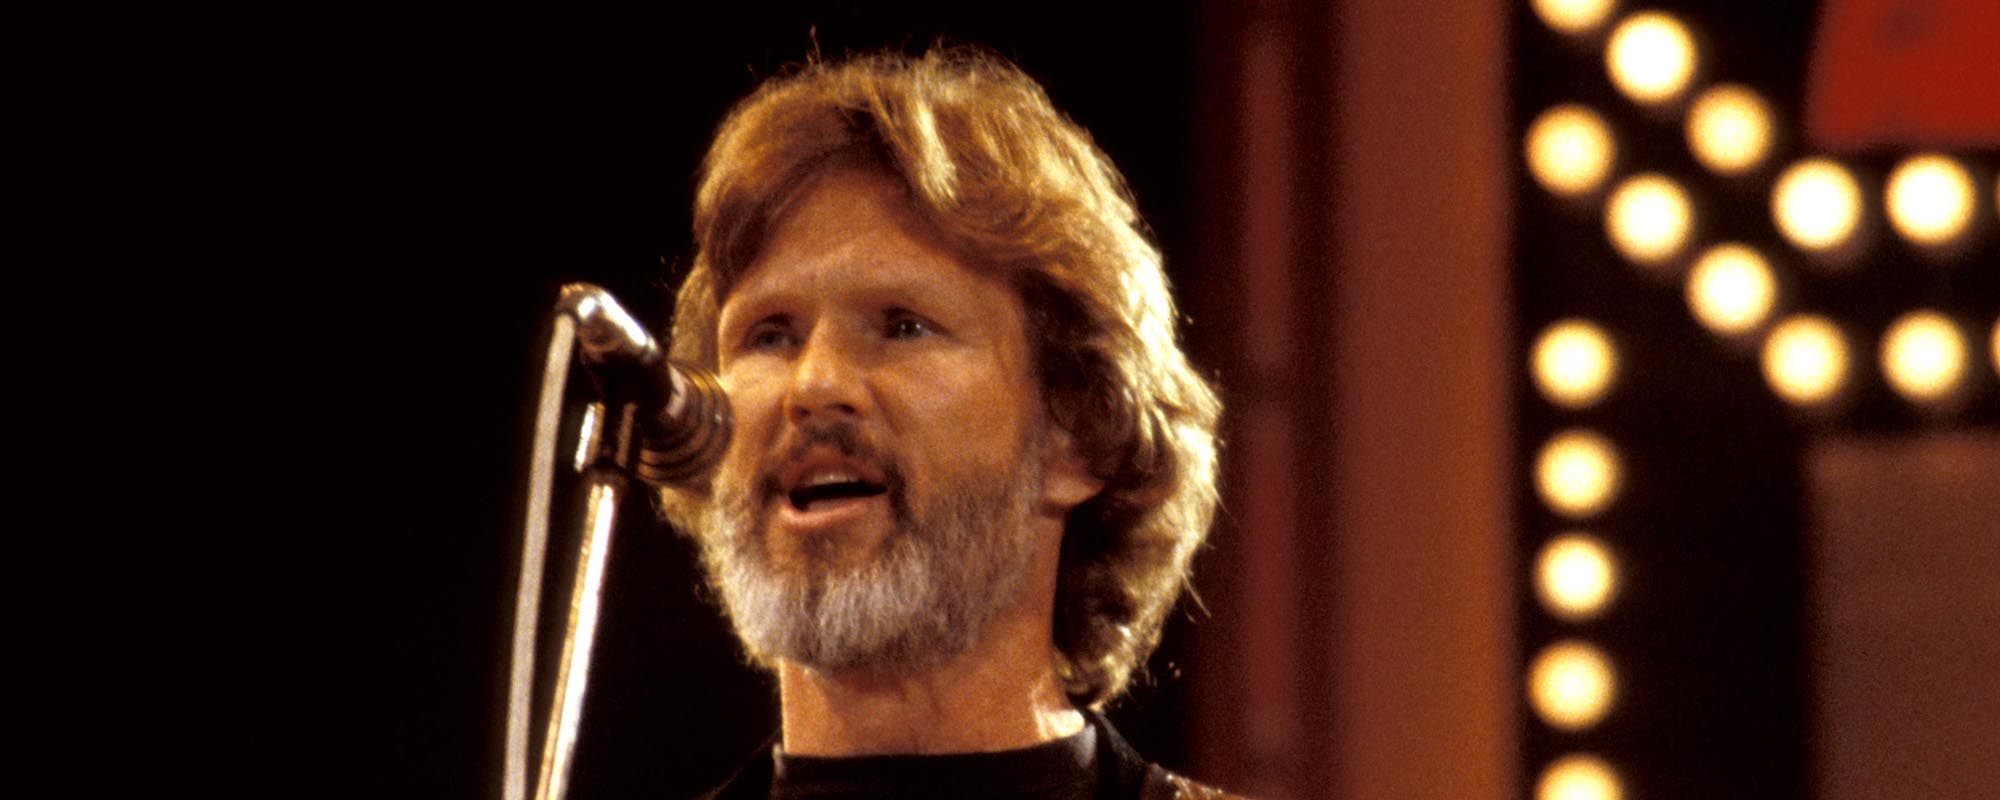 The Not-So-Subtle Political Commentary Behind Kris Kristofferson’s 1990 Single “Don’t Let the Bastards (Get You Down)”